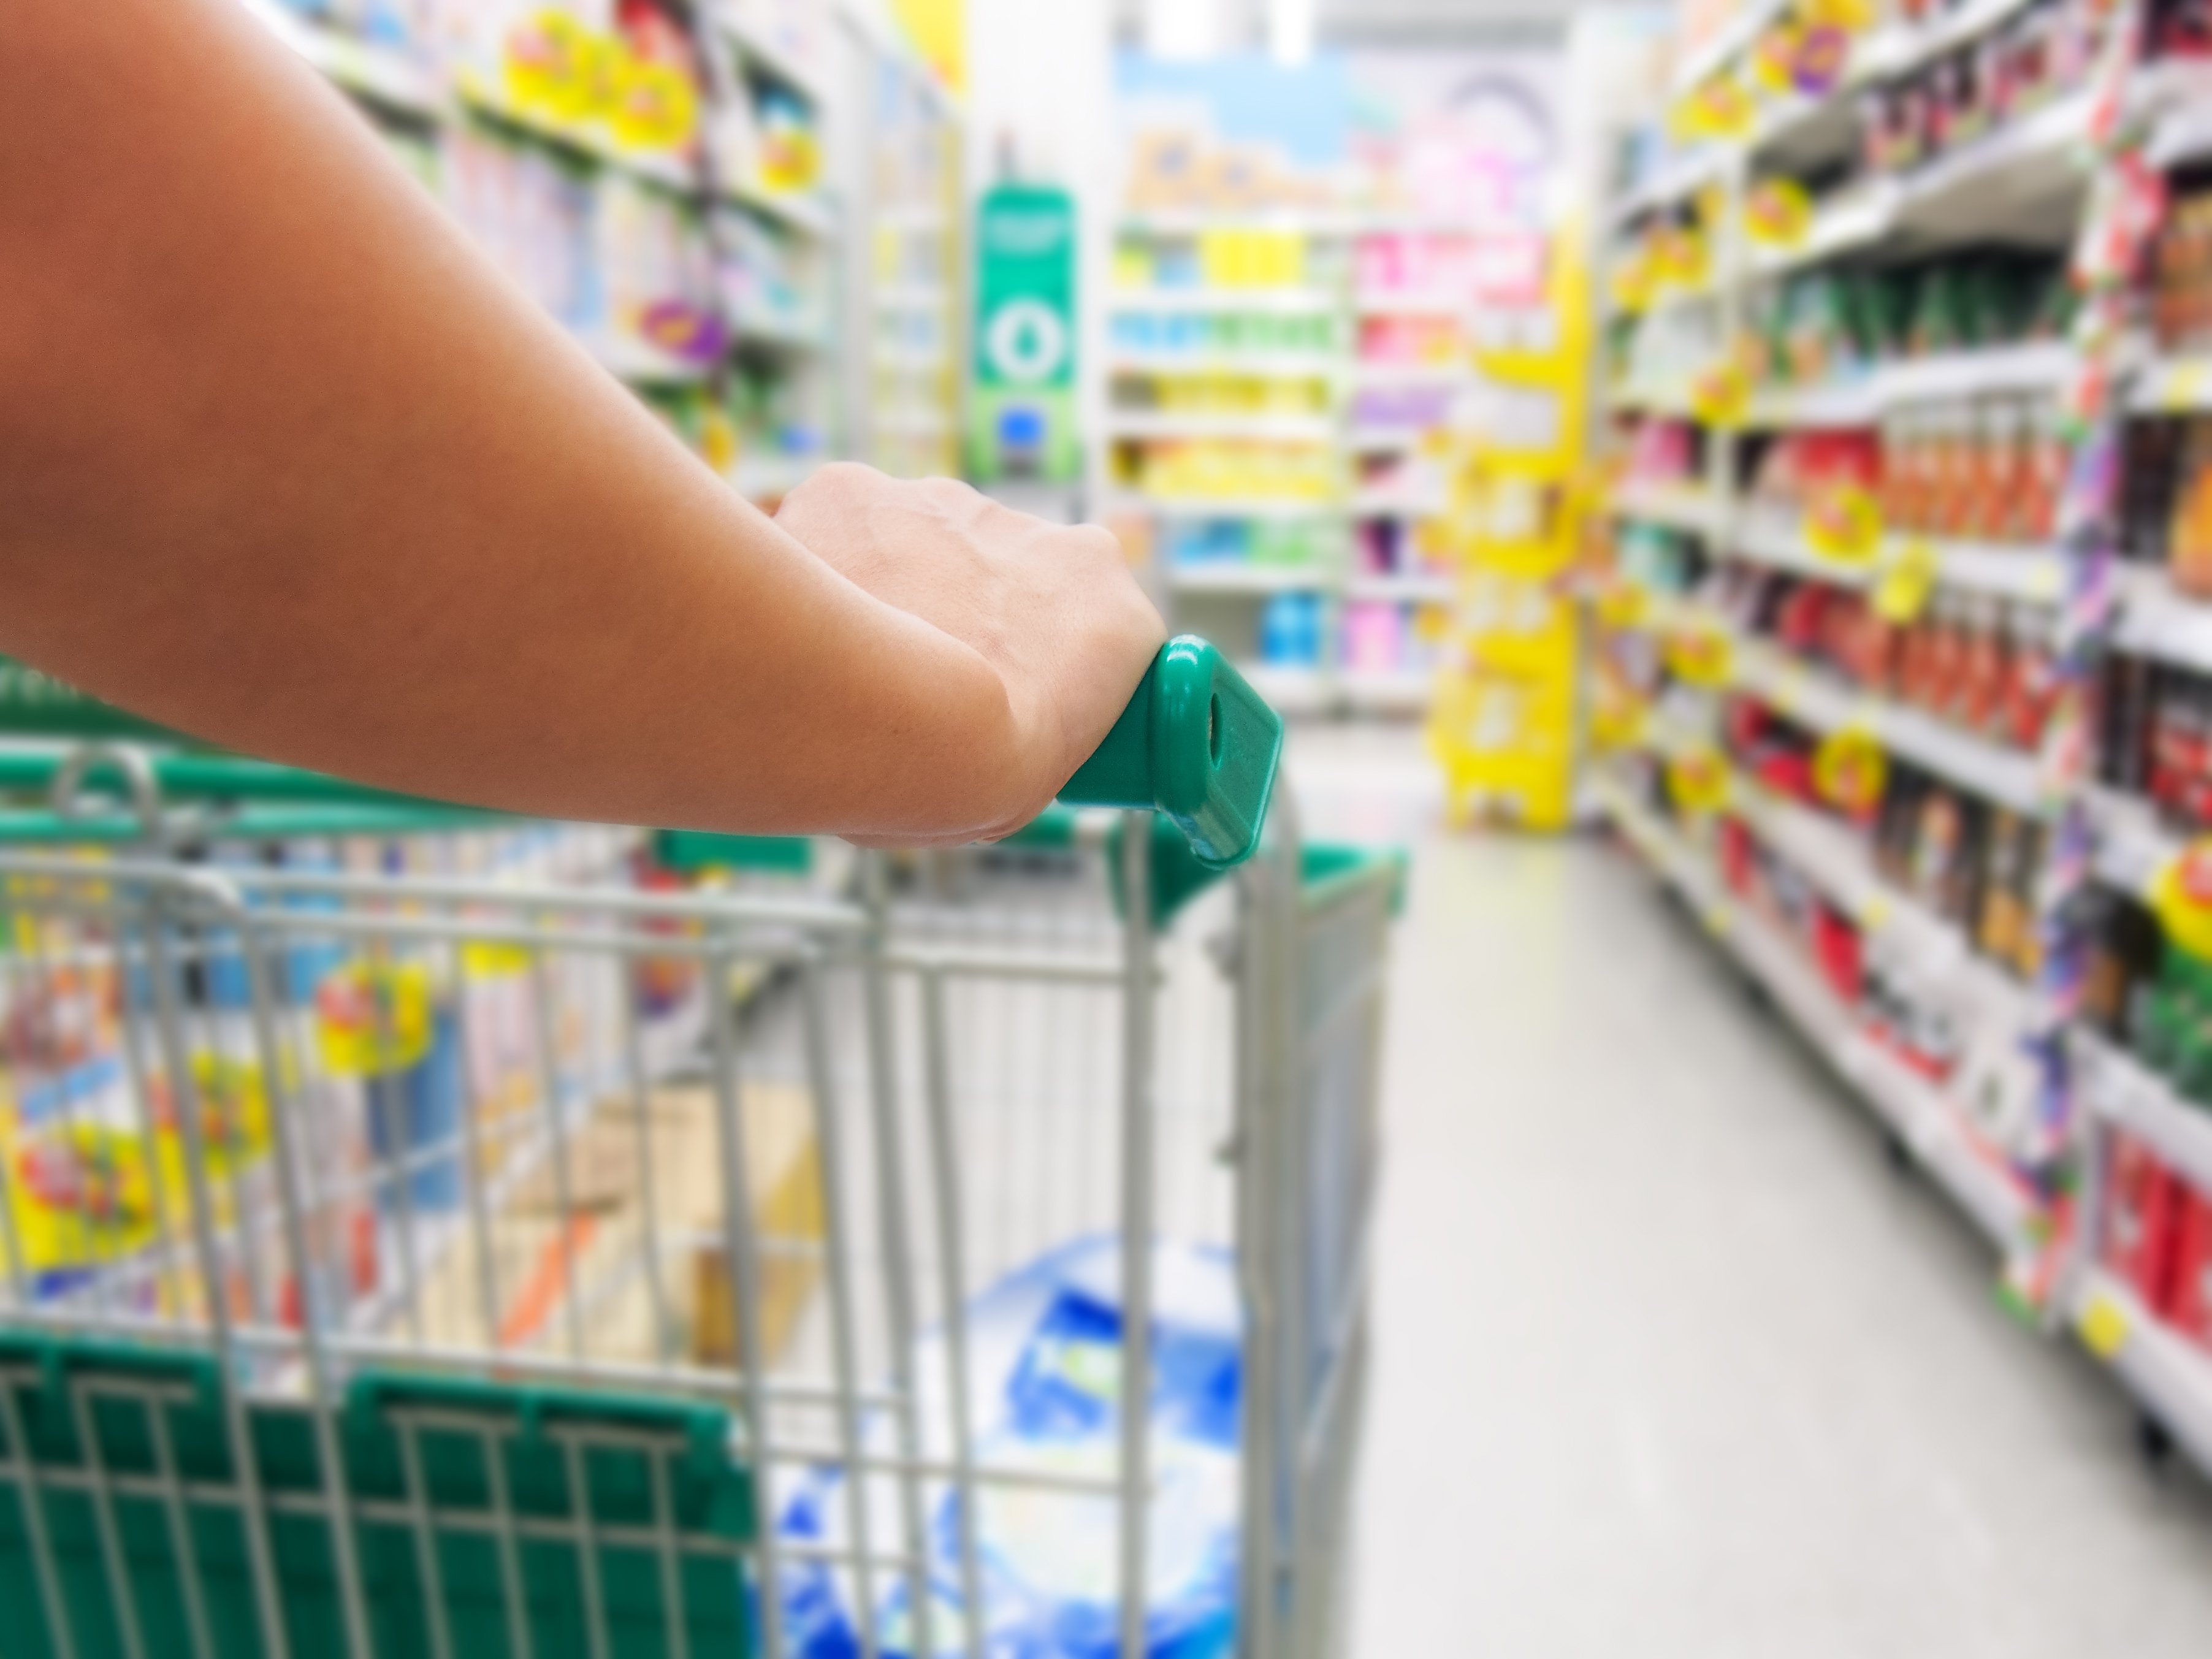 A close-up shot of someone's arm pushing a shopping trolley through a grocery aisle. Planning and sticking to a budget grocery list can help save dollars in the long-run and manage the rising costs.